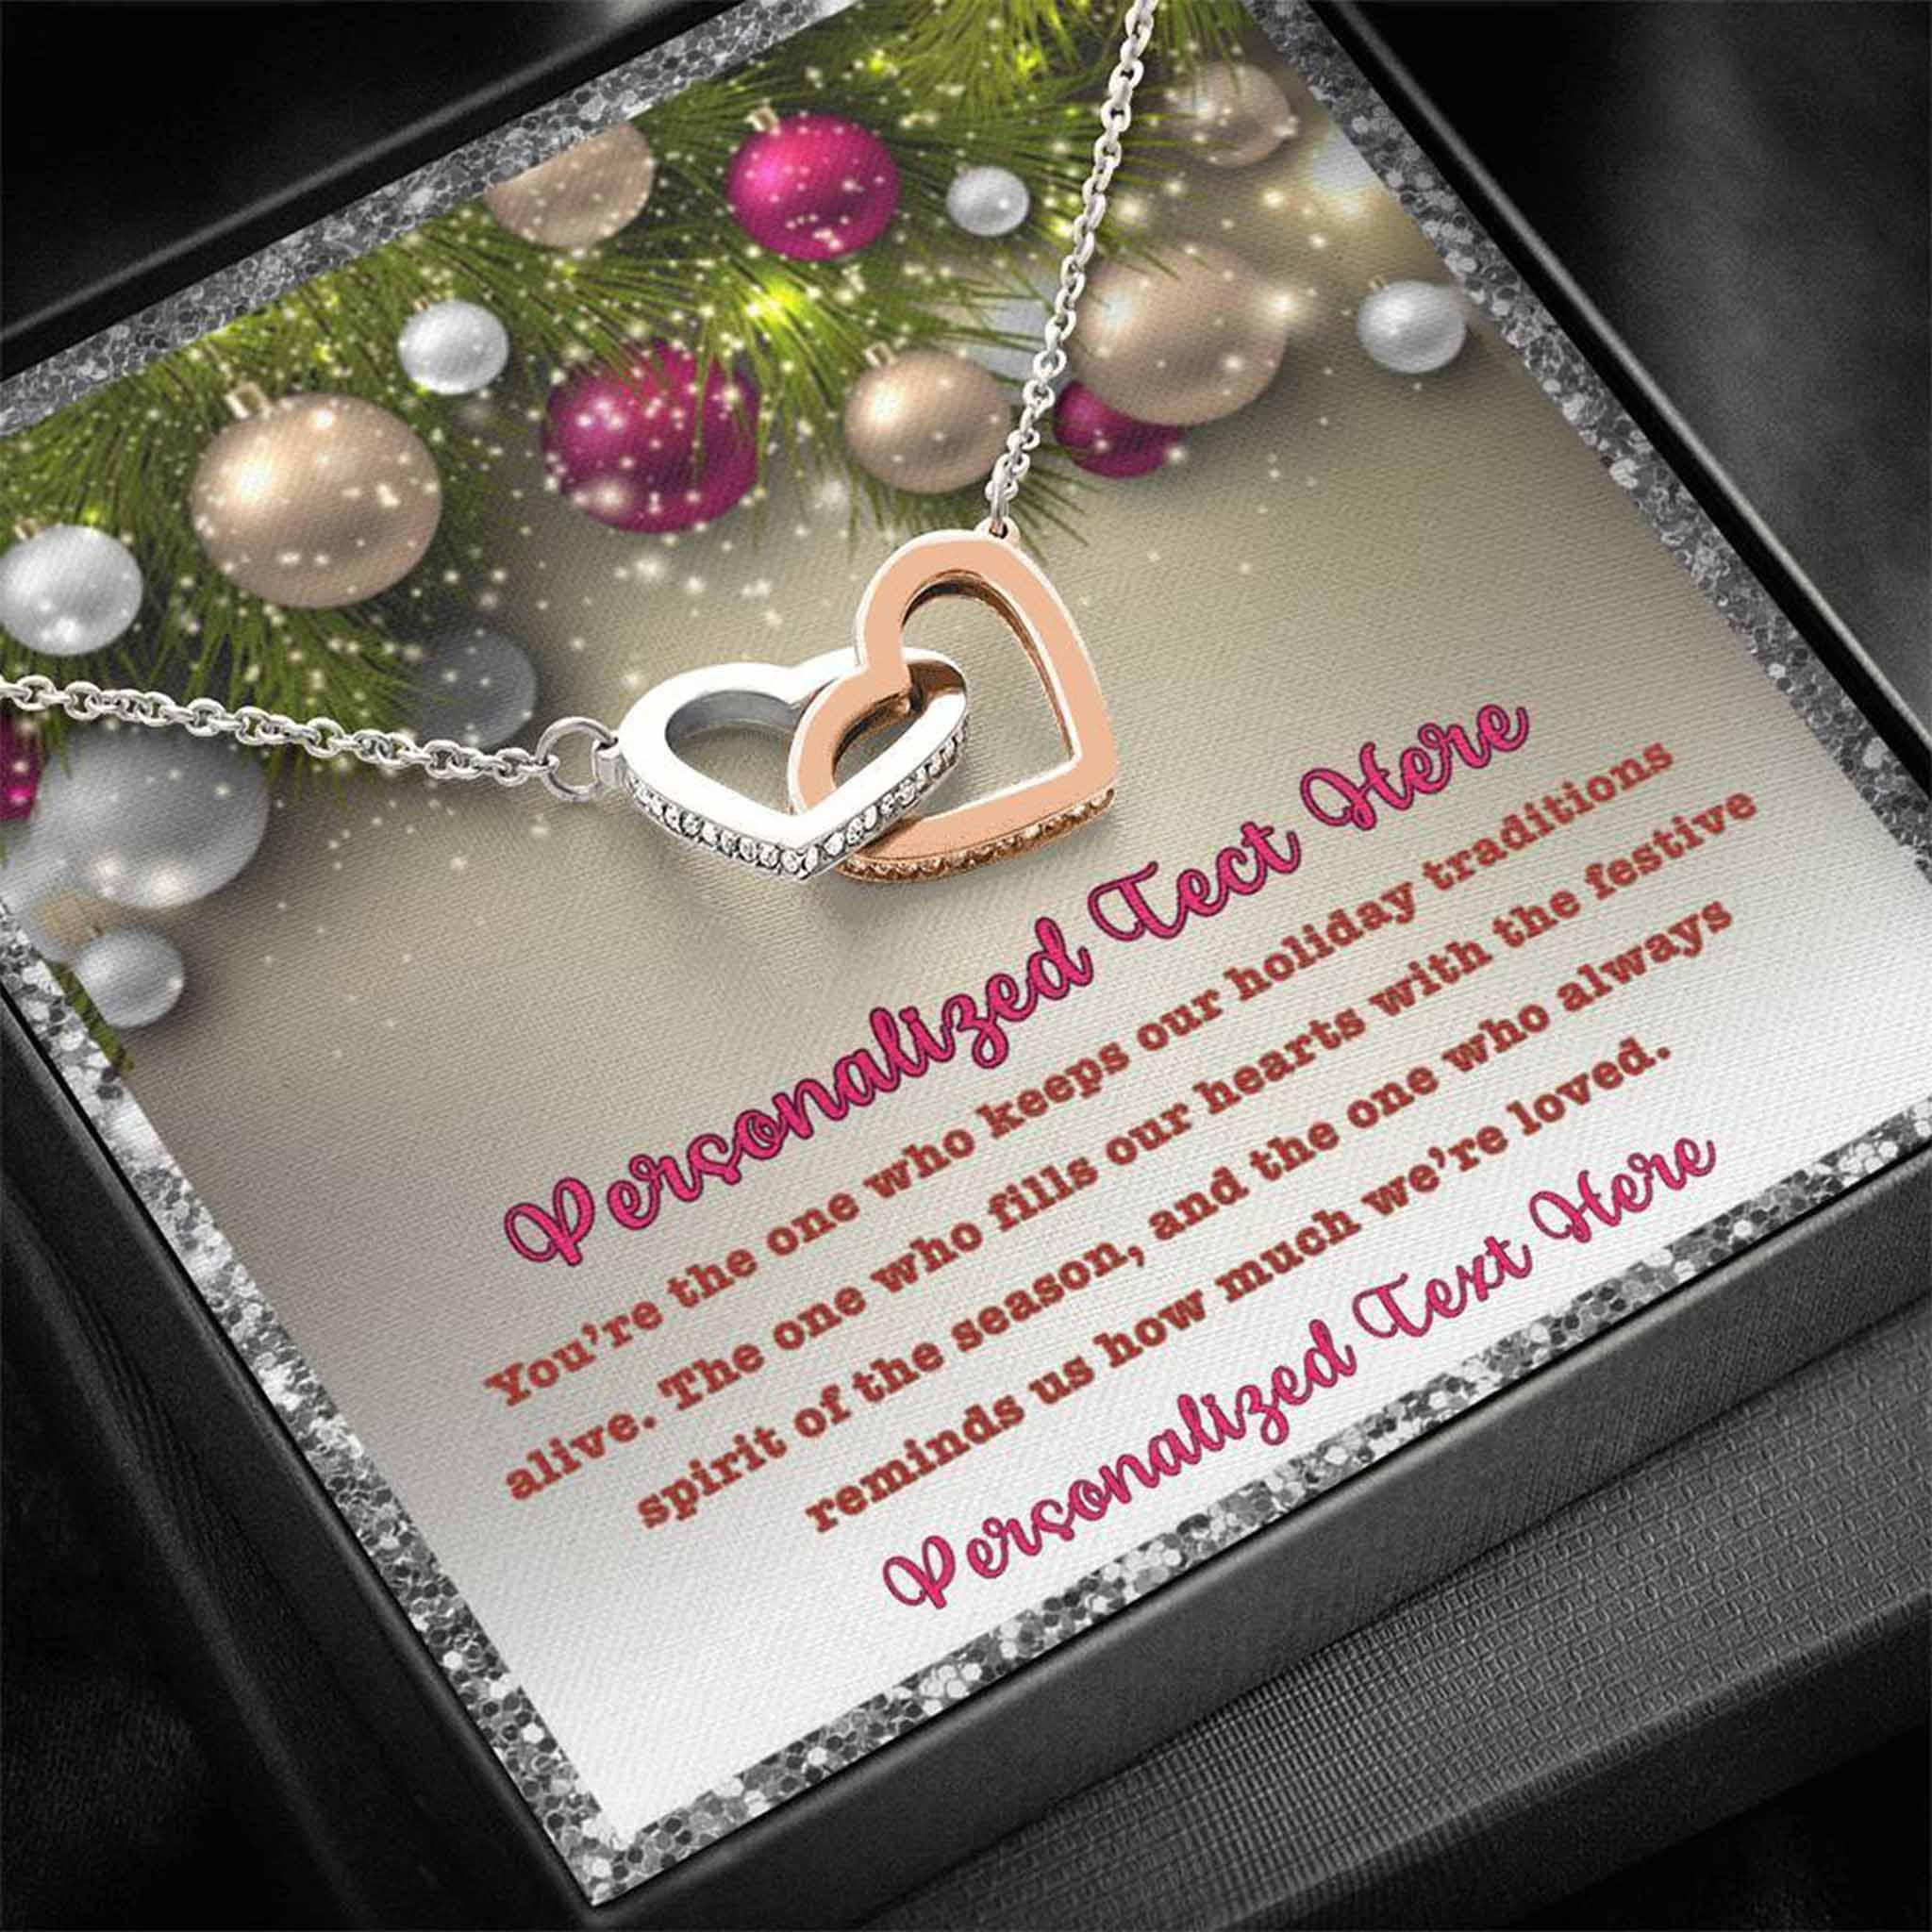 Interlocking Hearts Necklace Christmas Grandmother How Much We're Loved Personalized Insert CardCustomly Gifts